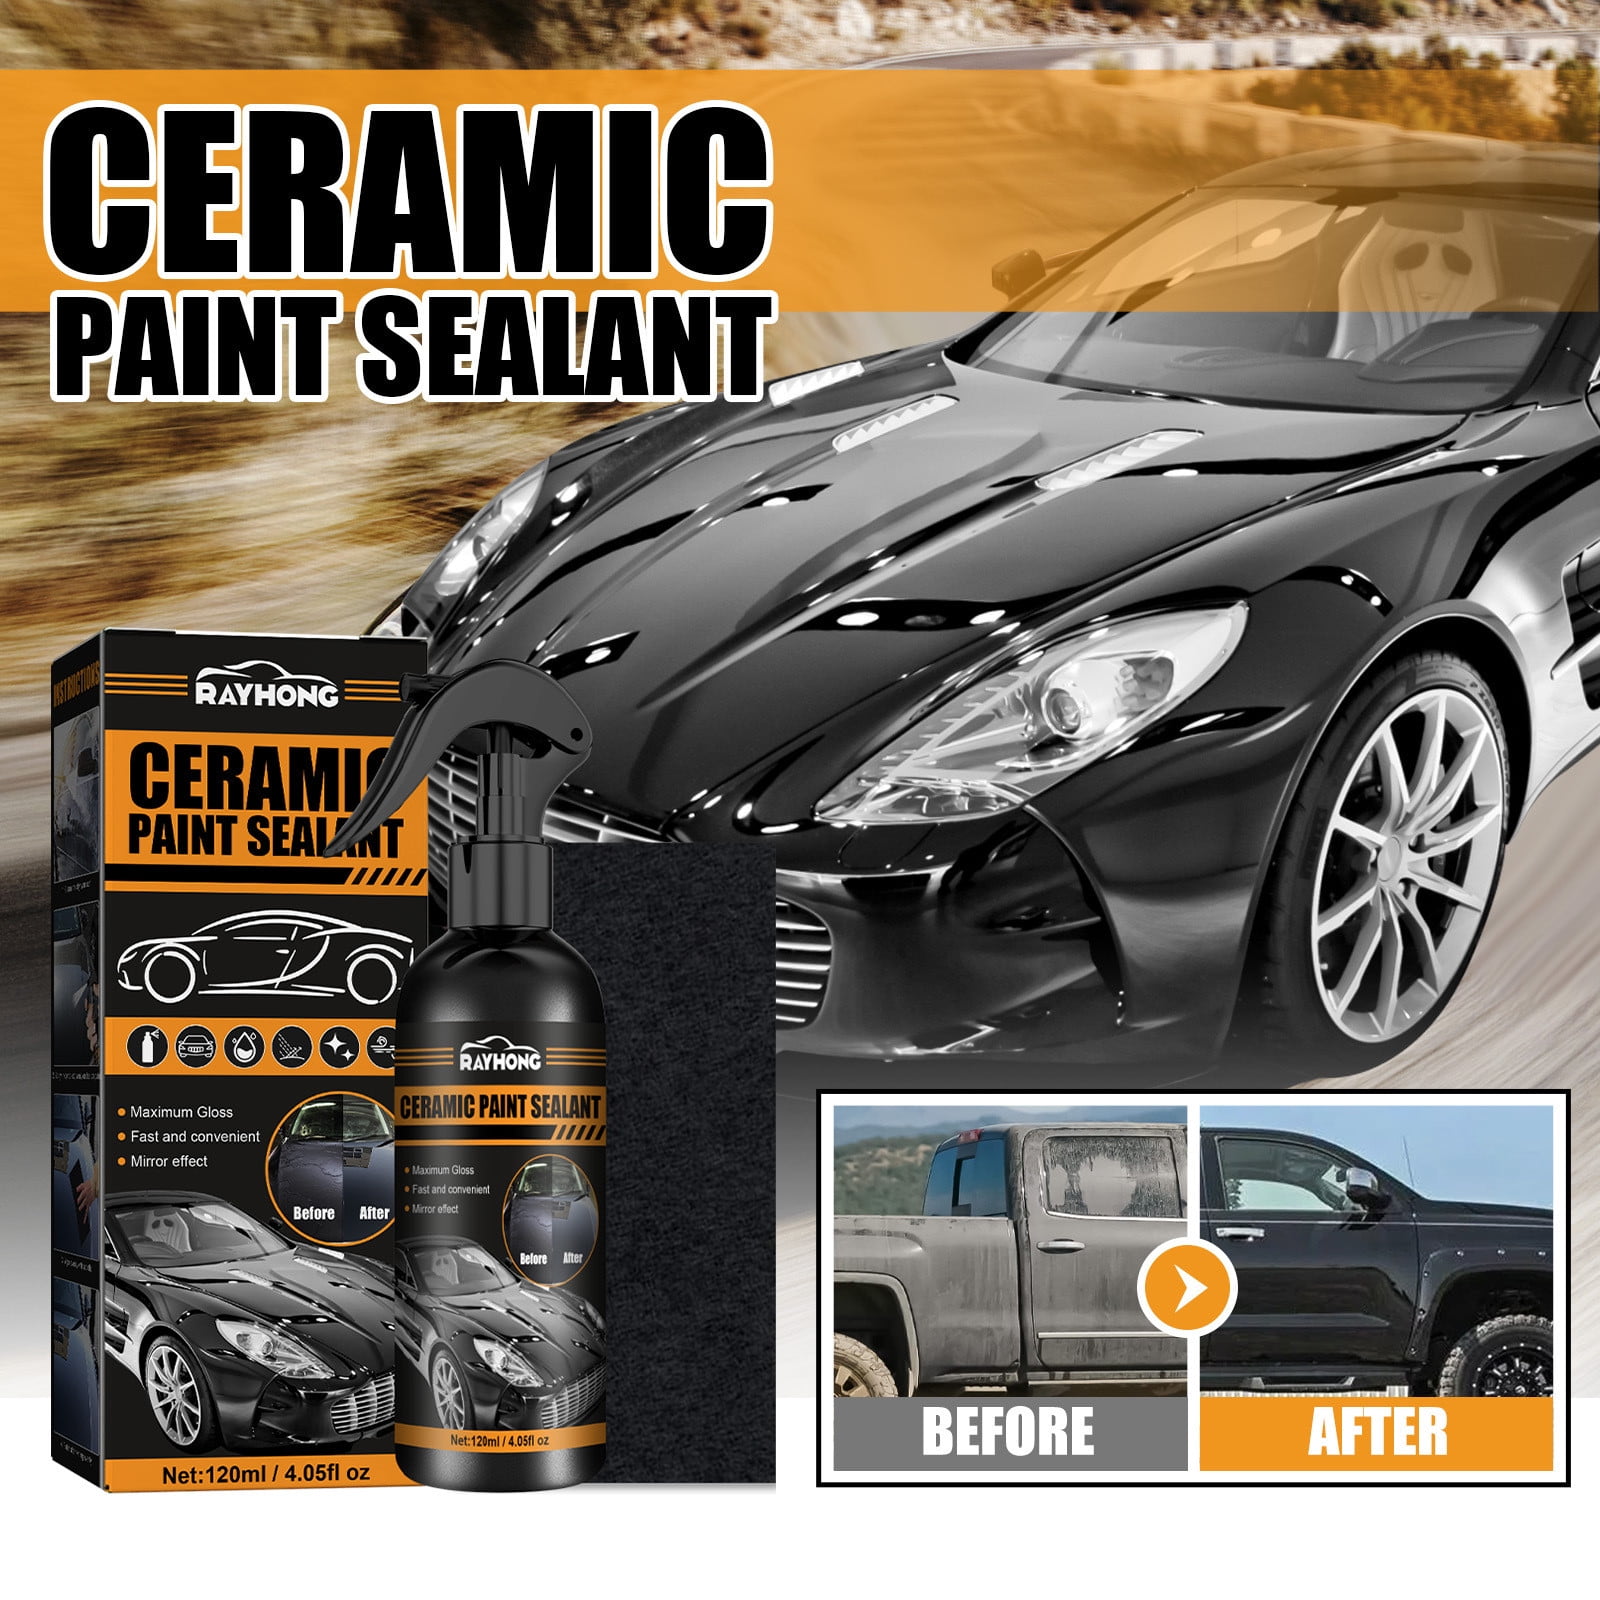 30ml 10H Anti-Scratch Auto Ceramic coating for cars Liquid Glass for Car  Car Polish Super Detailing Coating For Car Styling - AliExpress